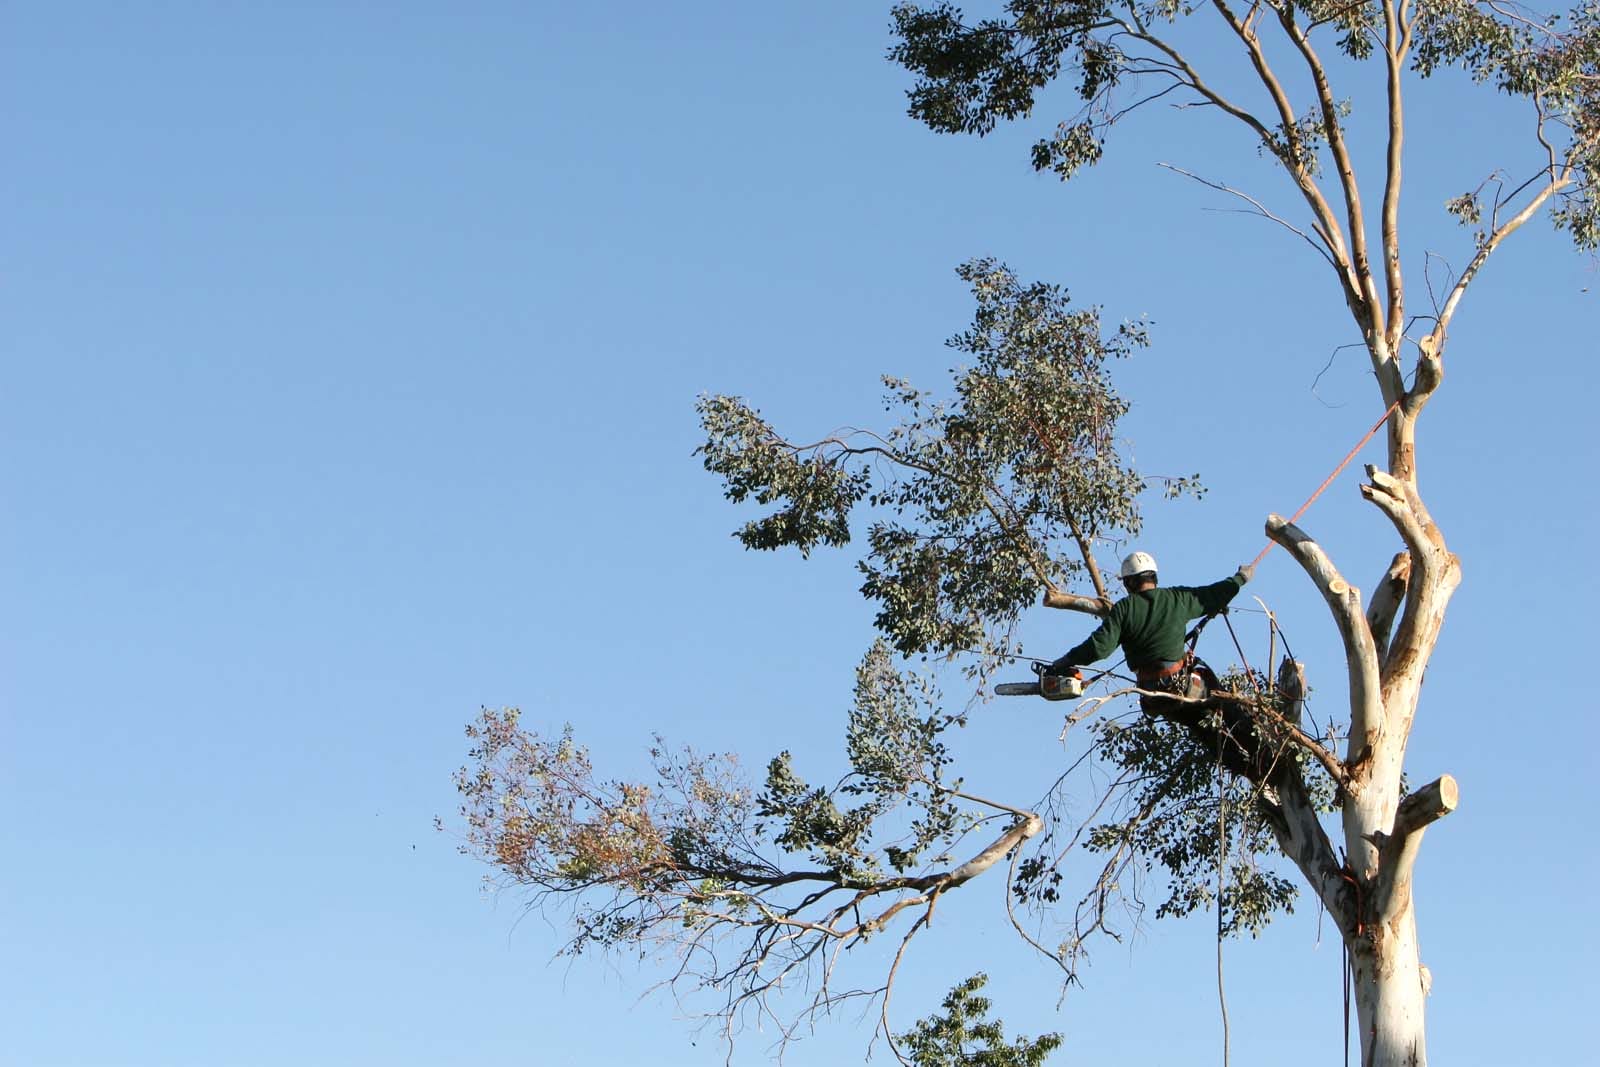 A large tree is being cut down by a man suspended ropes.